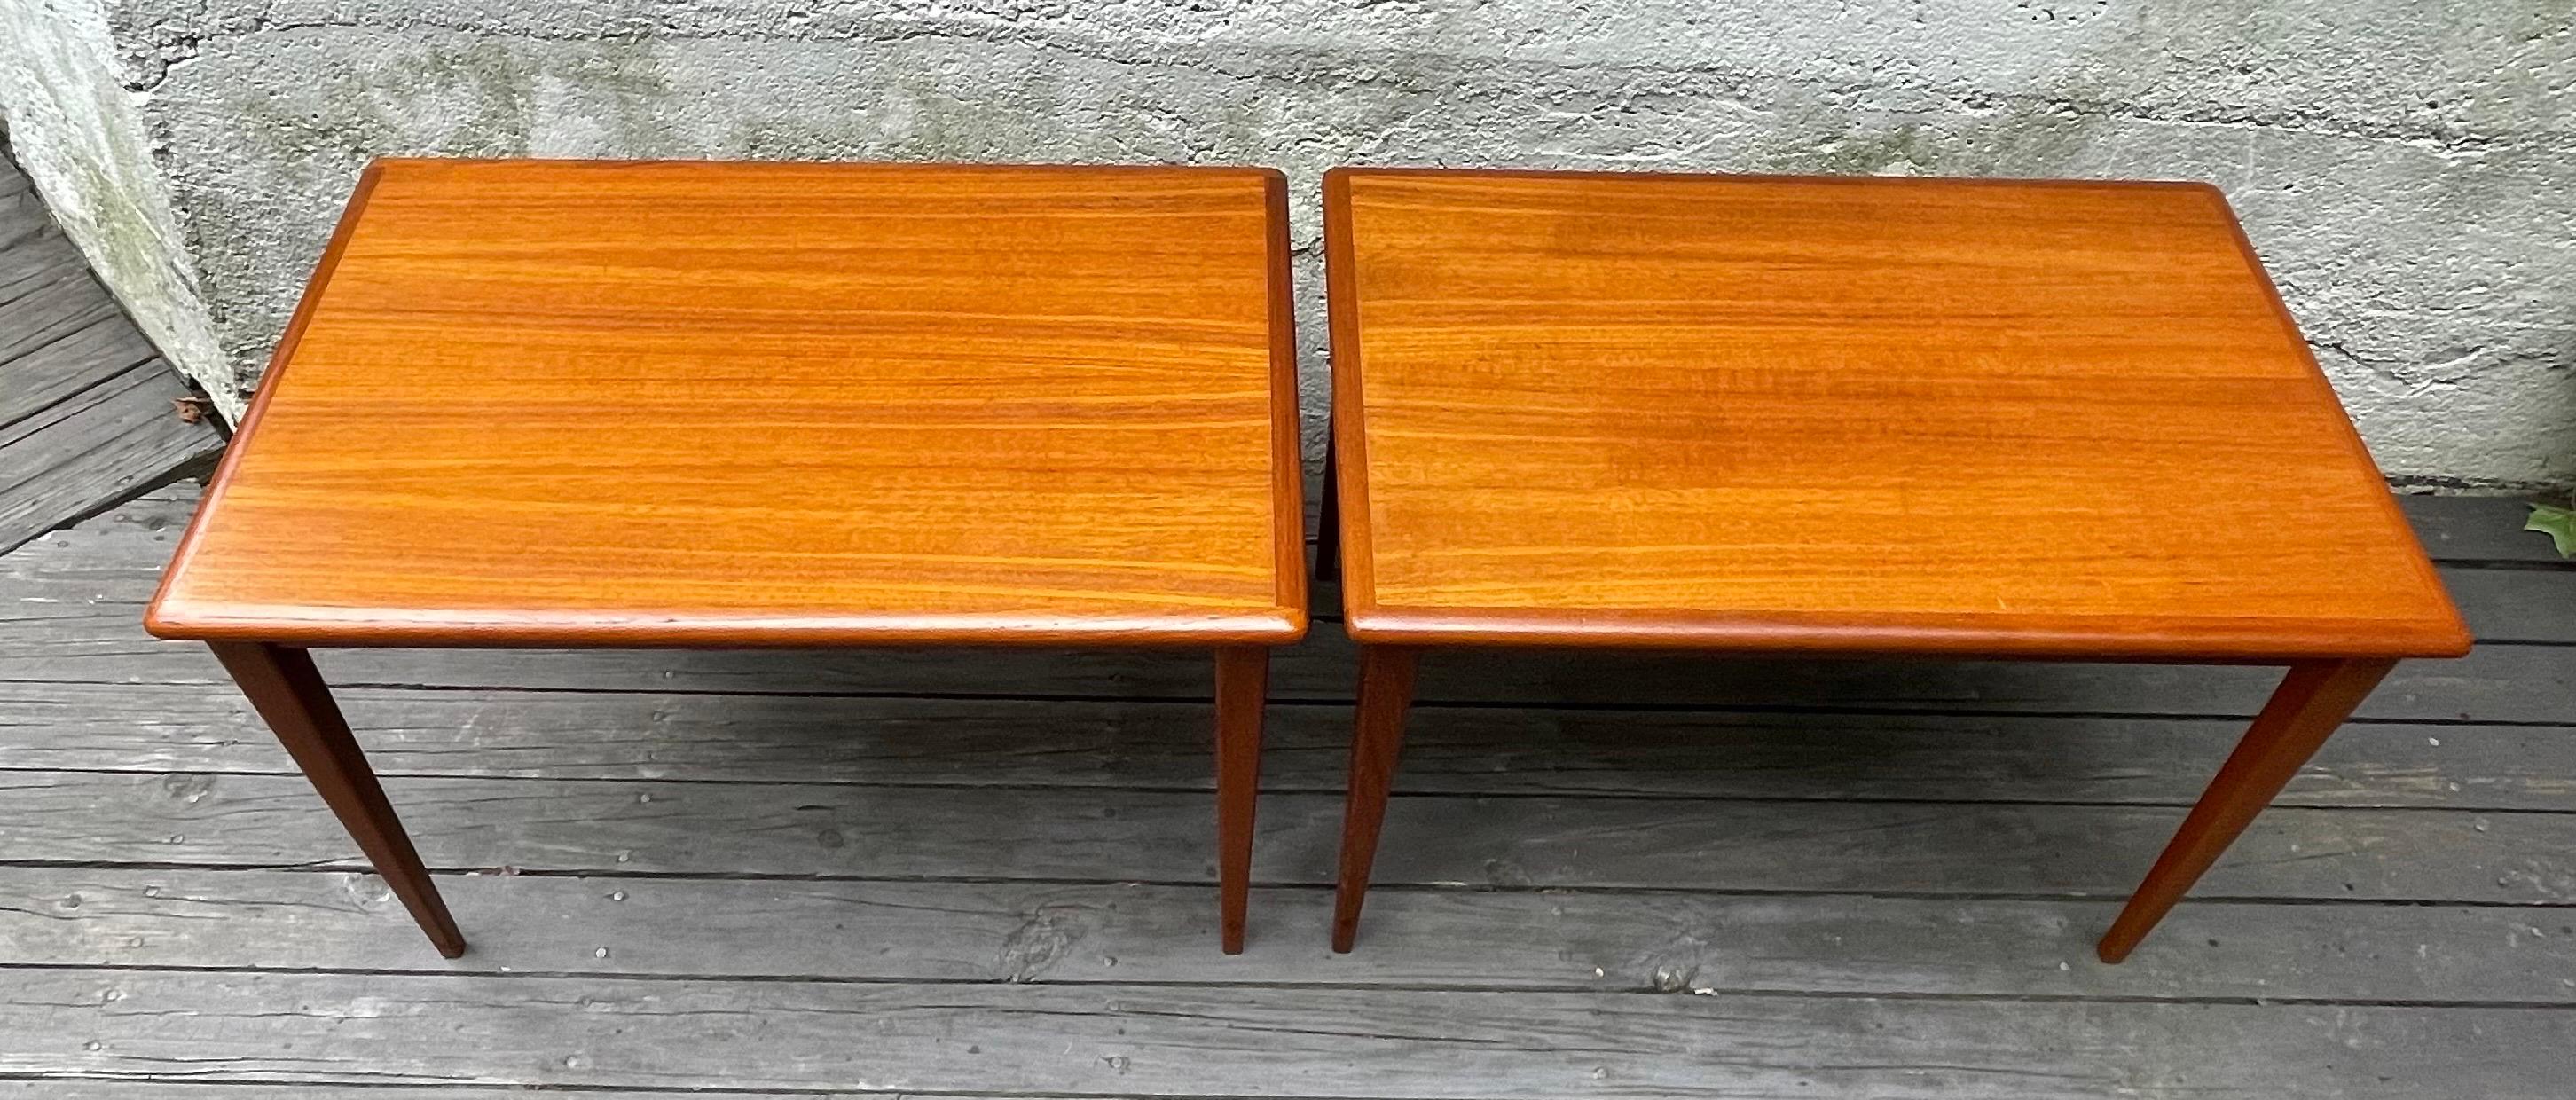 Beautiful pair of Mid-Century Modern teak side tables or end tables with sleek legs and nice finished edges. Made in Denmark, 1960's.